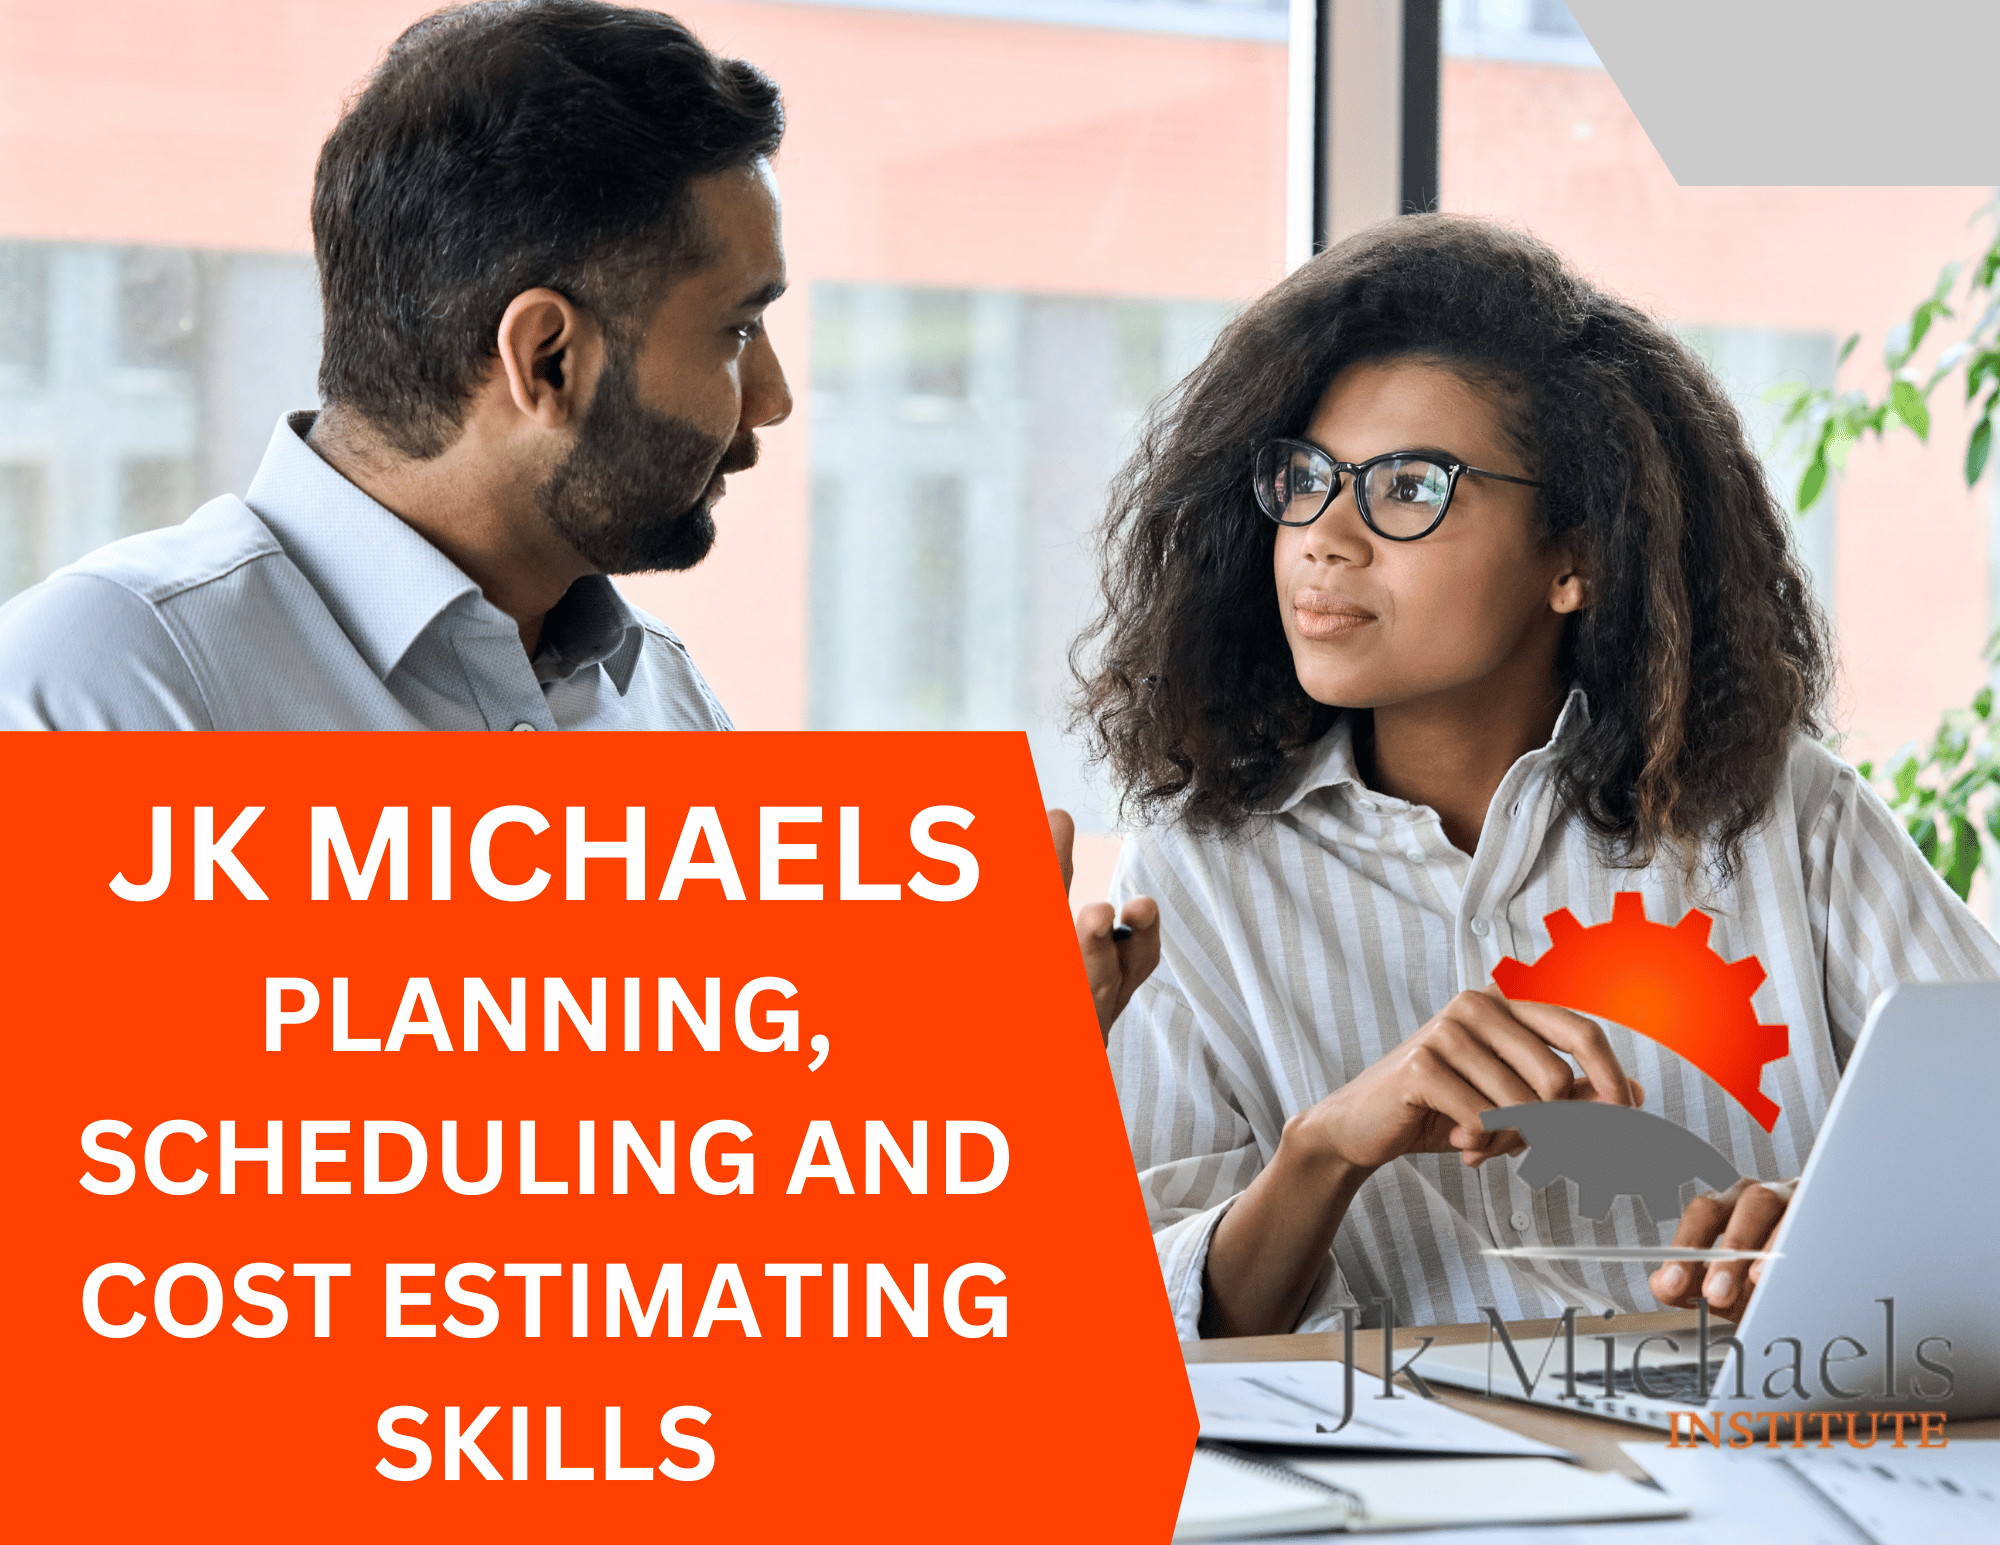 PLANNING, SCHEDULING AND COST ESTIMATING SKILLS